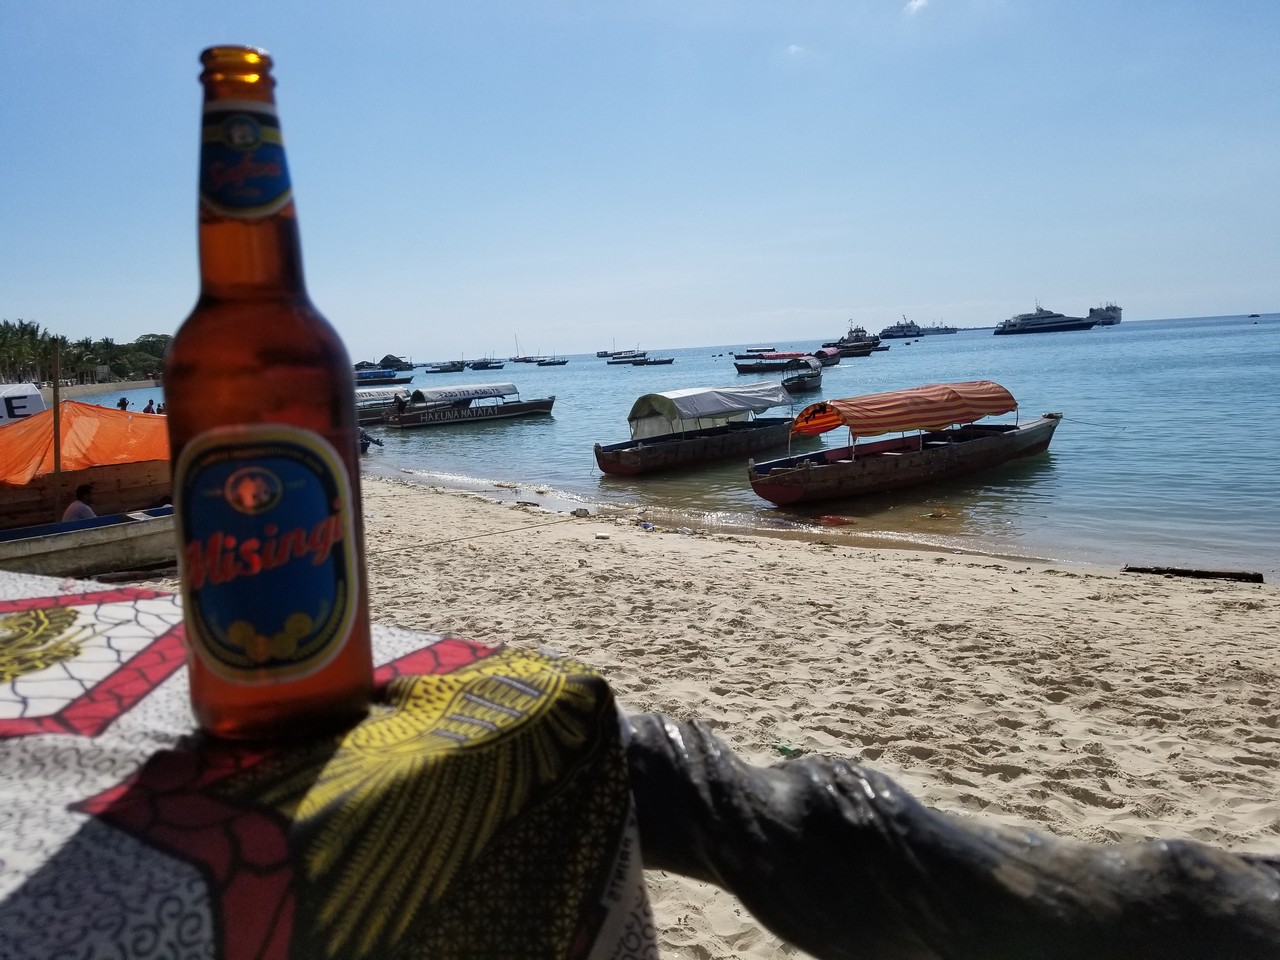 a beer bottle on a table on a beach with boats in the background